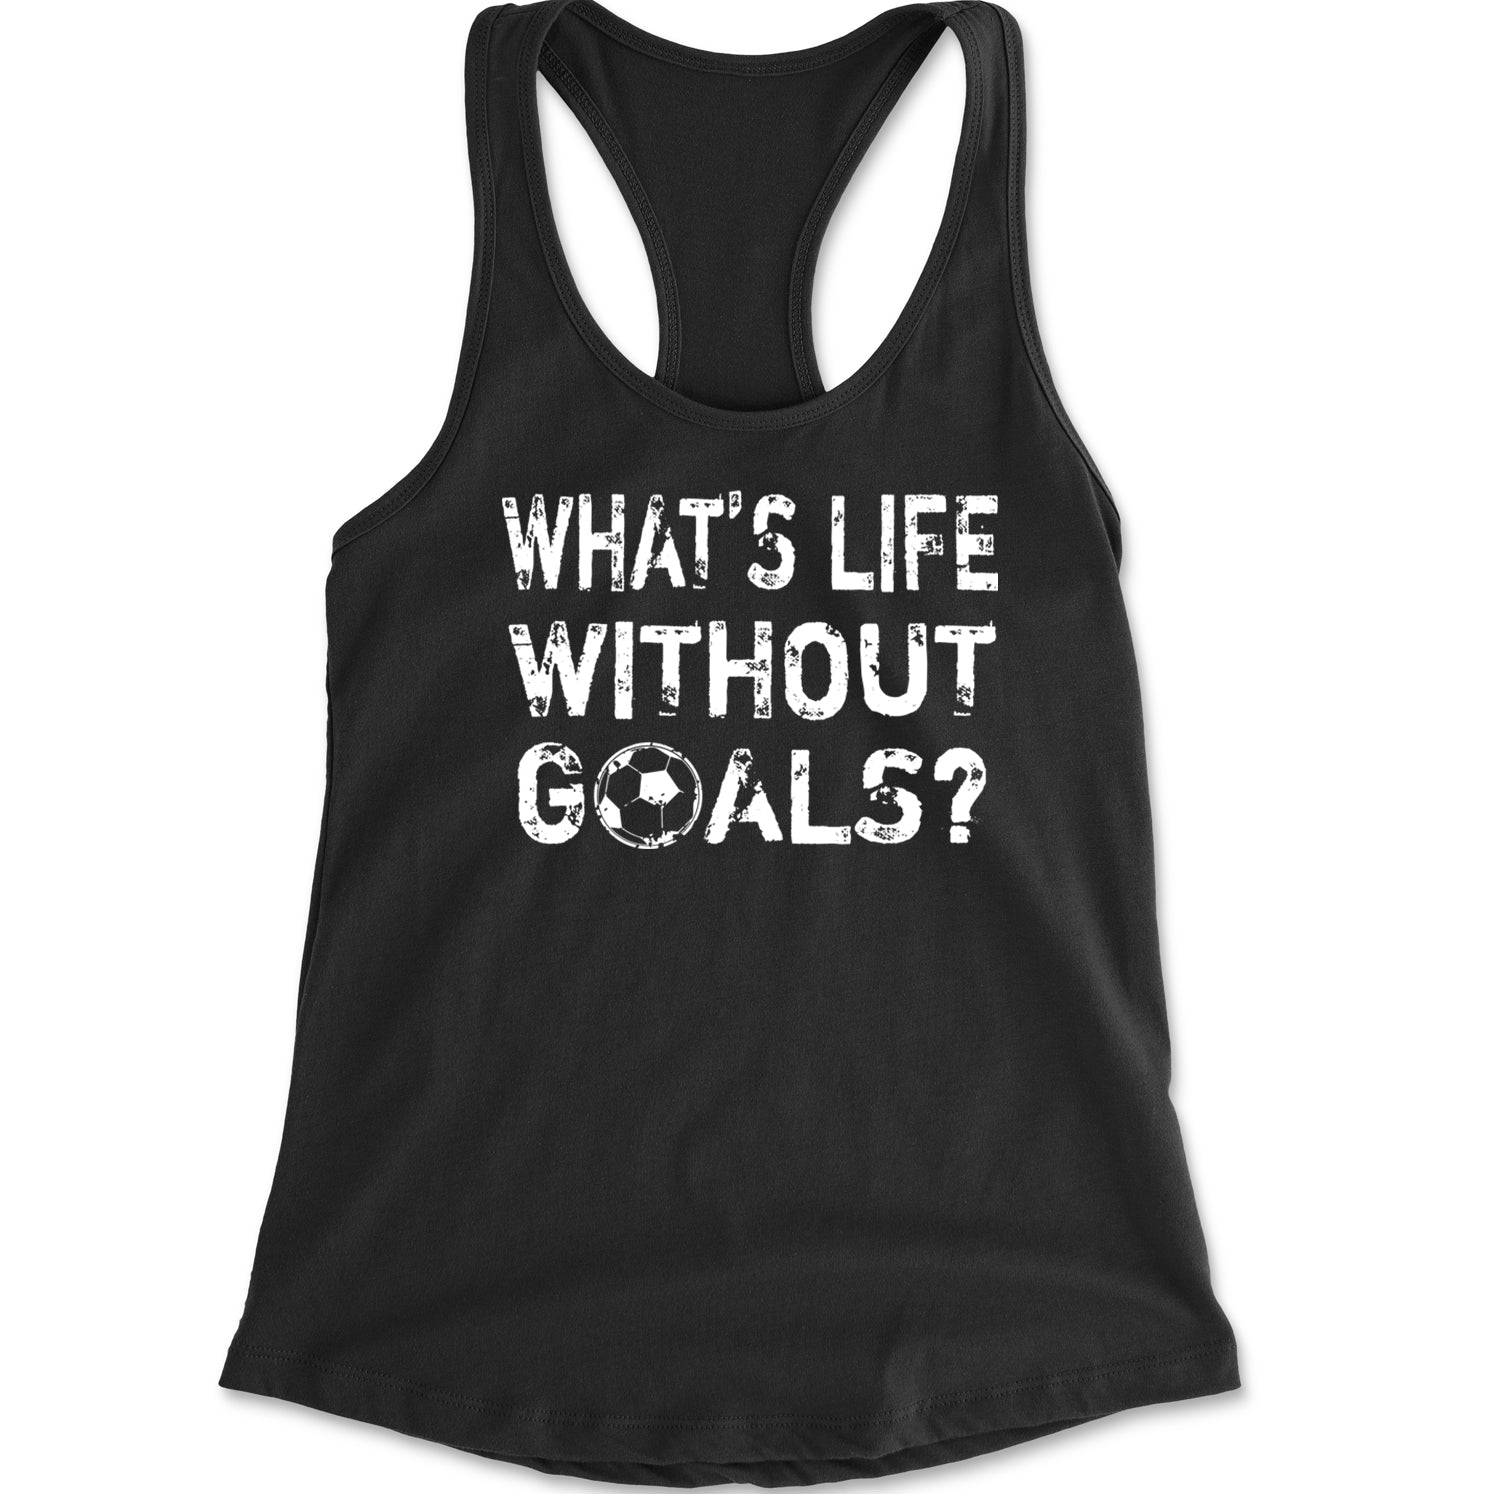 What's Life Without Goals Soccer Futbol Racerback Tank Top for Women